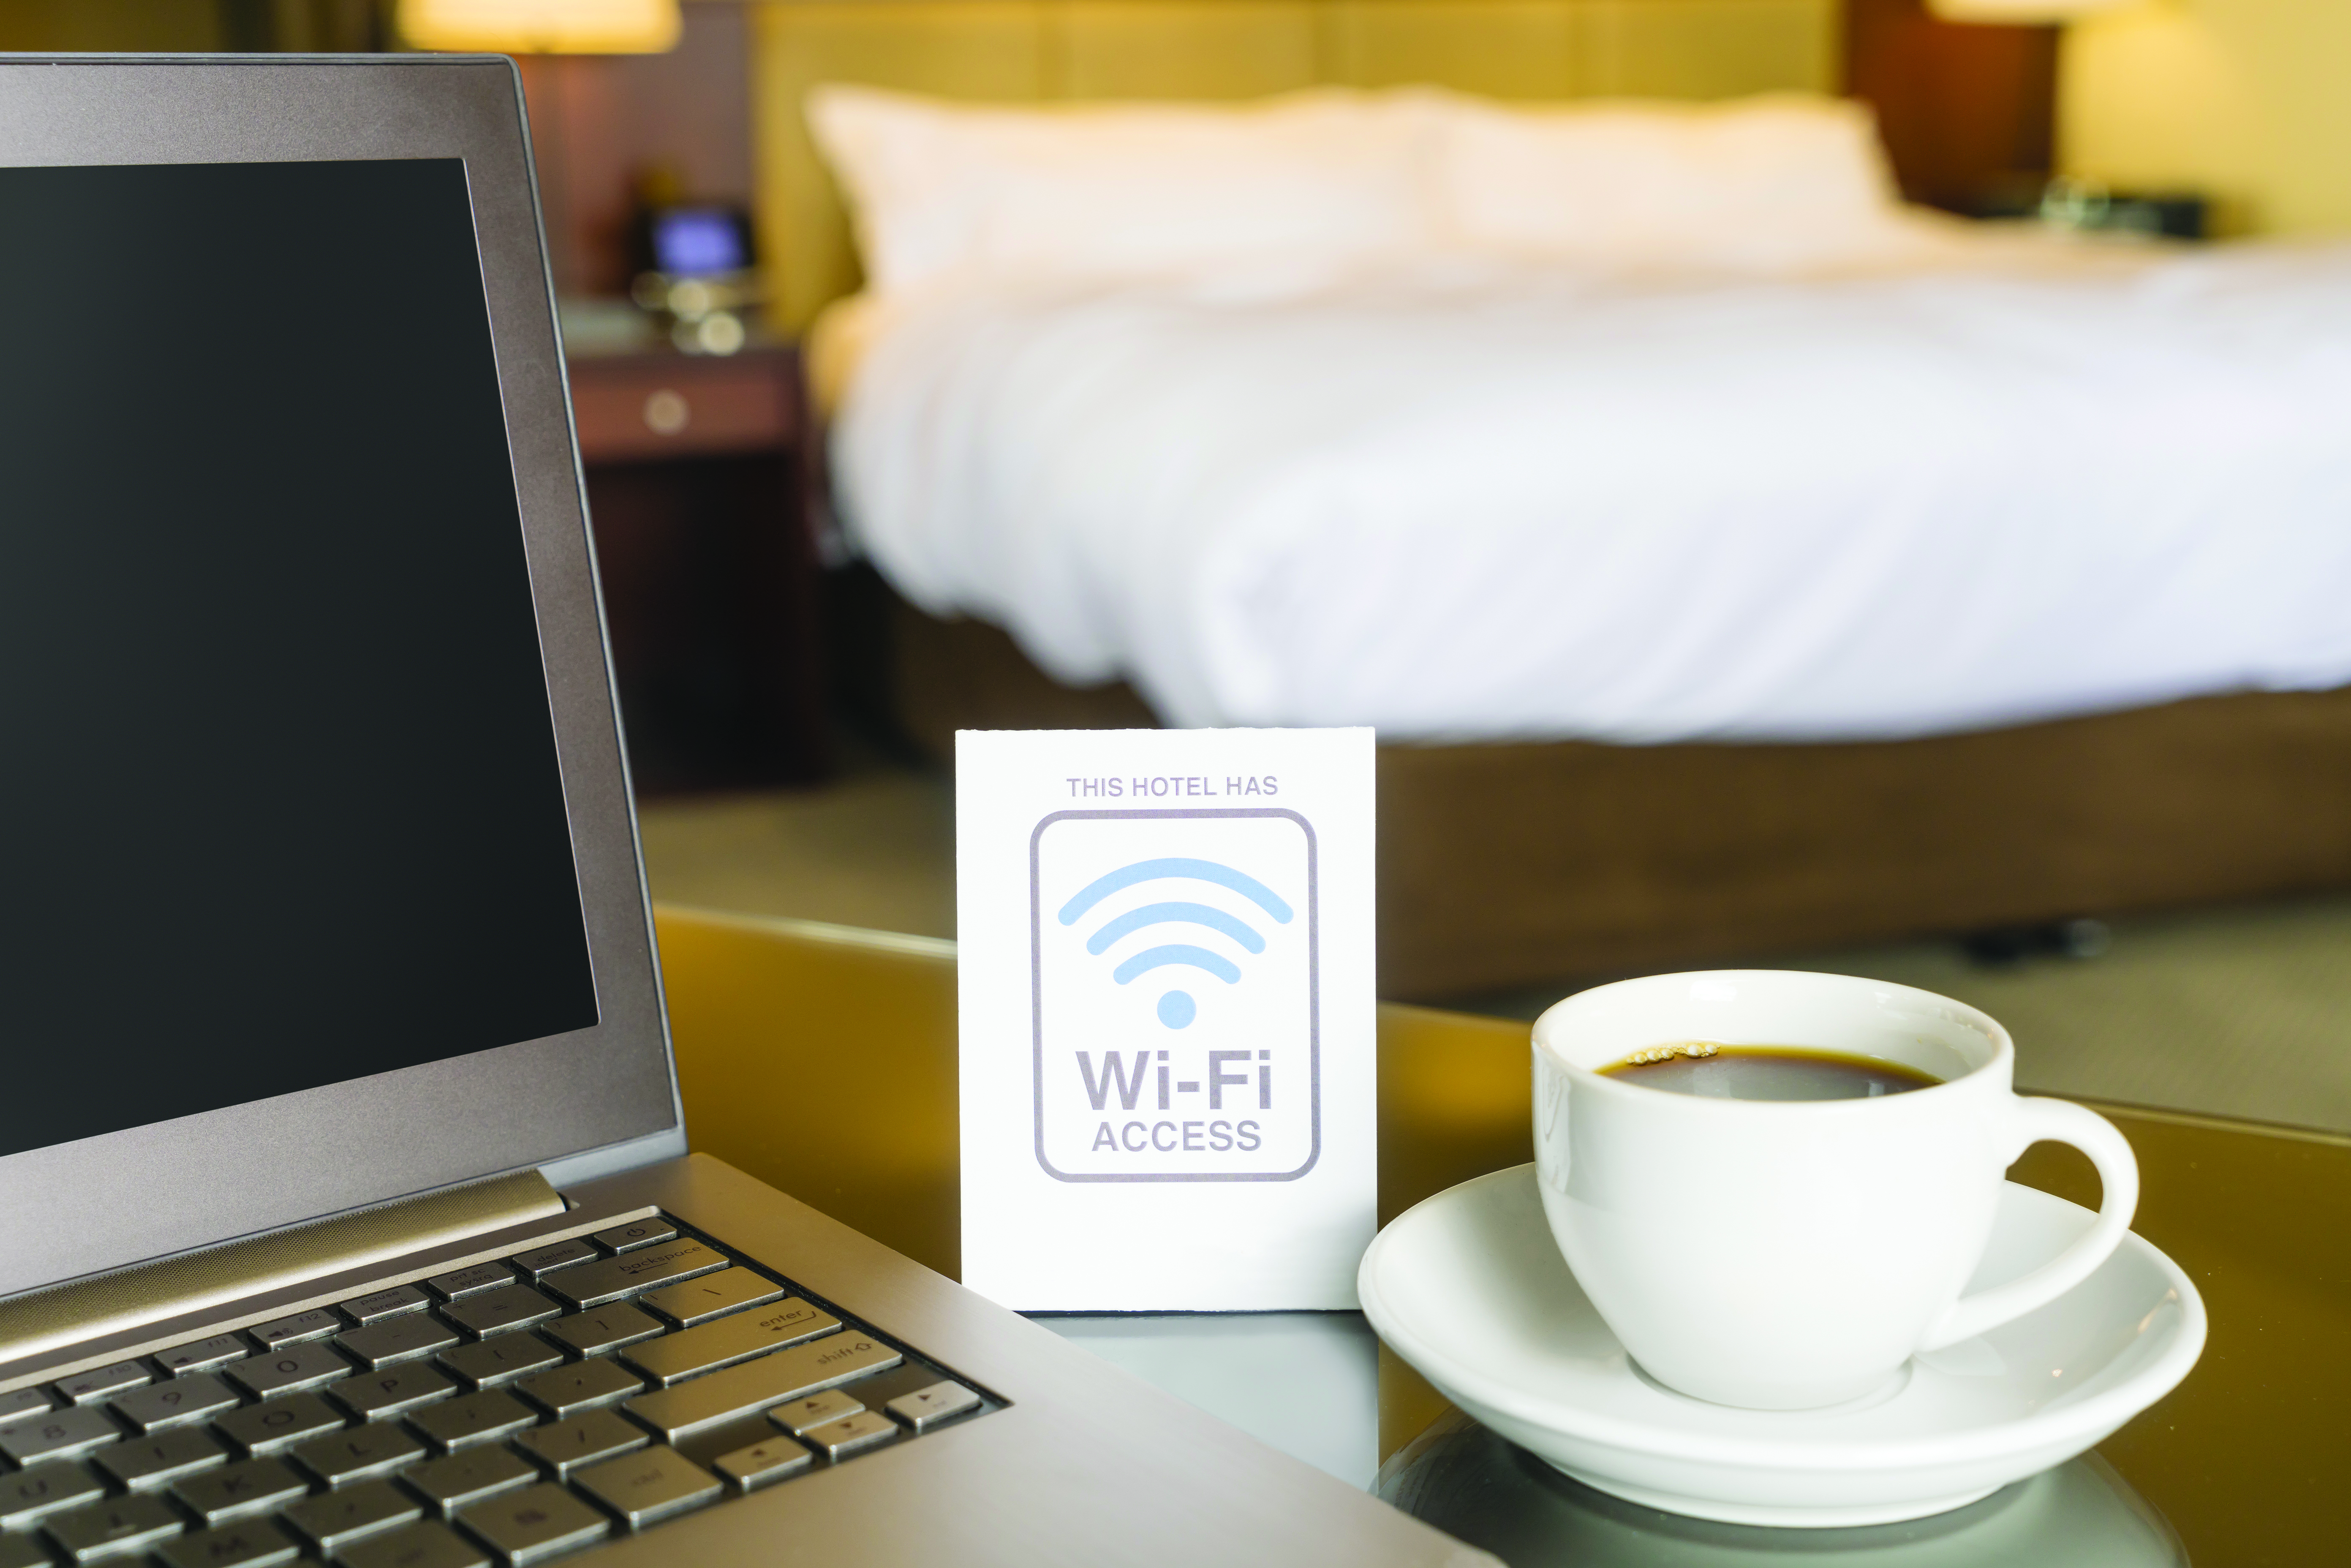 Hotels zero in on Wi-Fi infrastructure for guest satisfaction